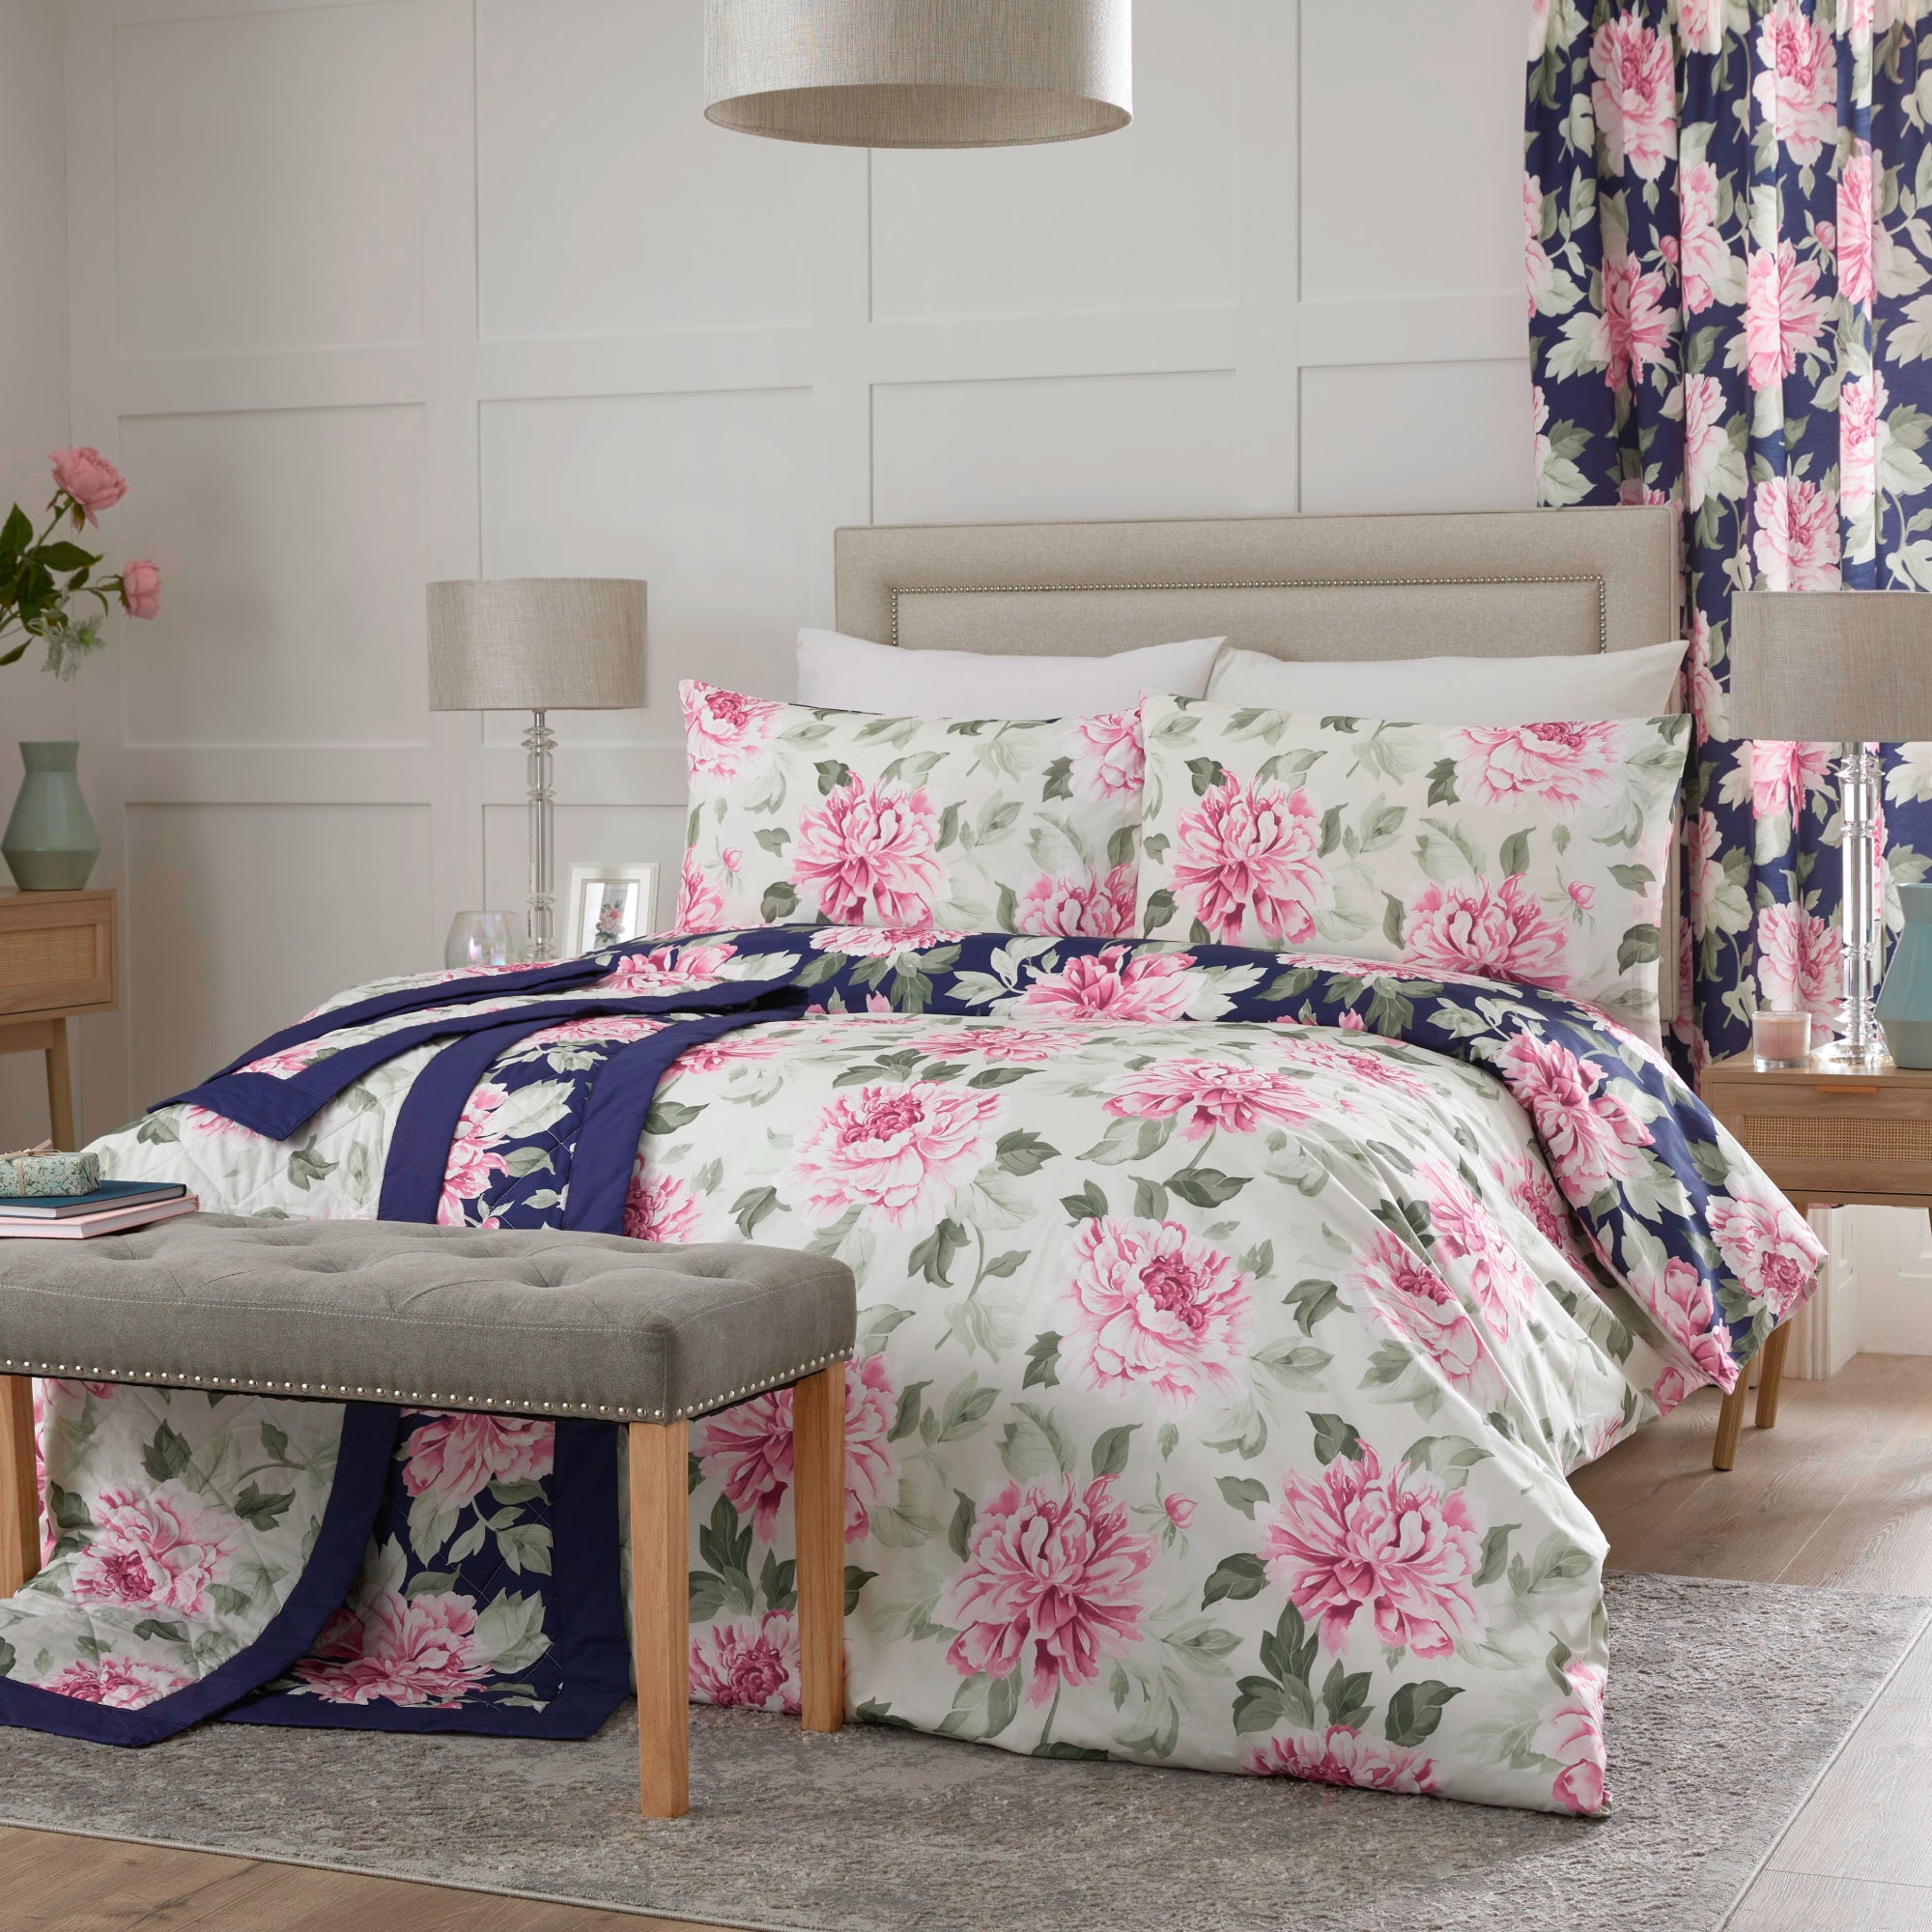 Duvet Cover Set Kirsten by Dreams And Drapes Design in Pink/Blue